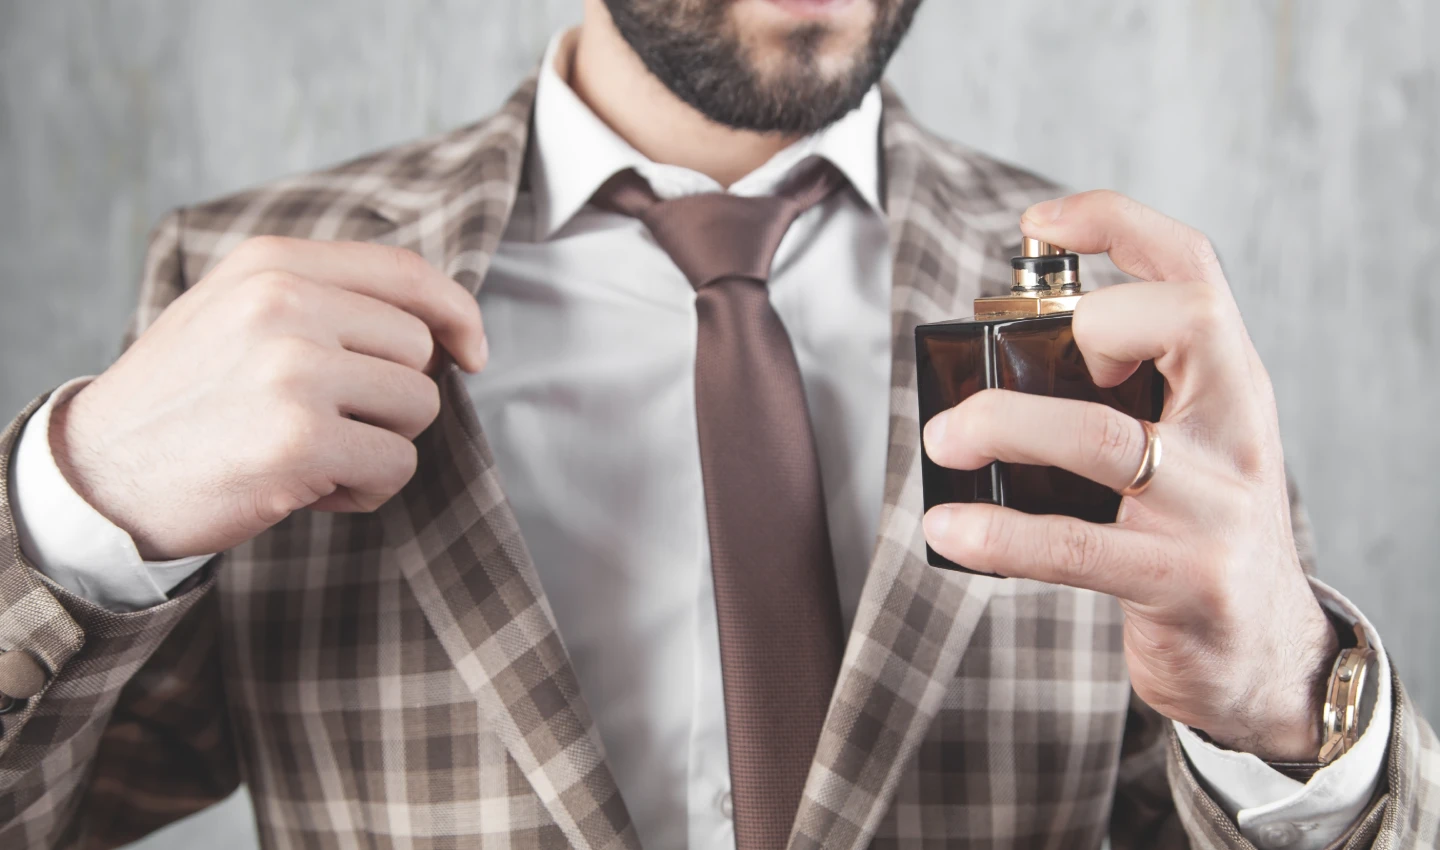 A man spraying perfume on himself as a representation of consumer engagement in perfume production impacts.